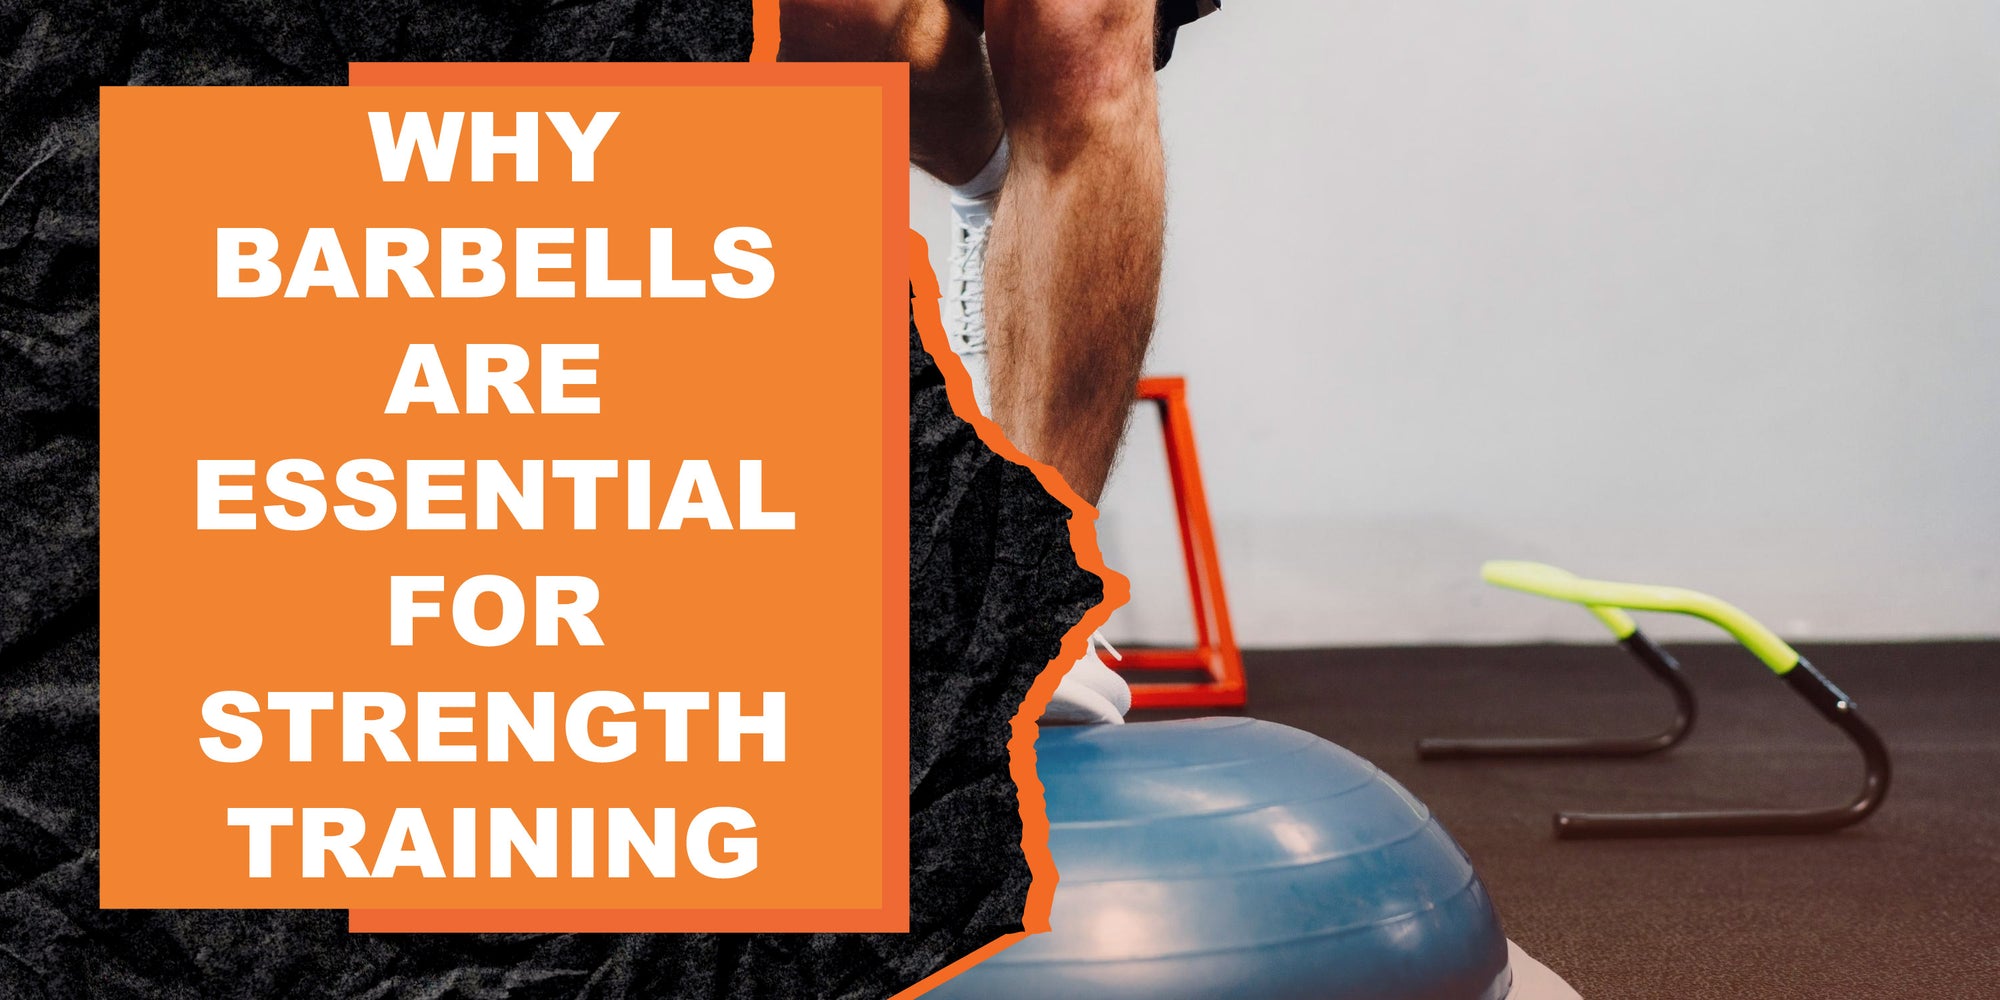 Why Barbells Are Essential for Strength Training